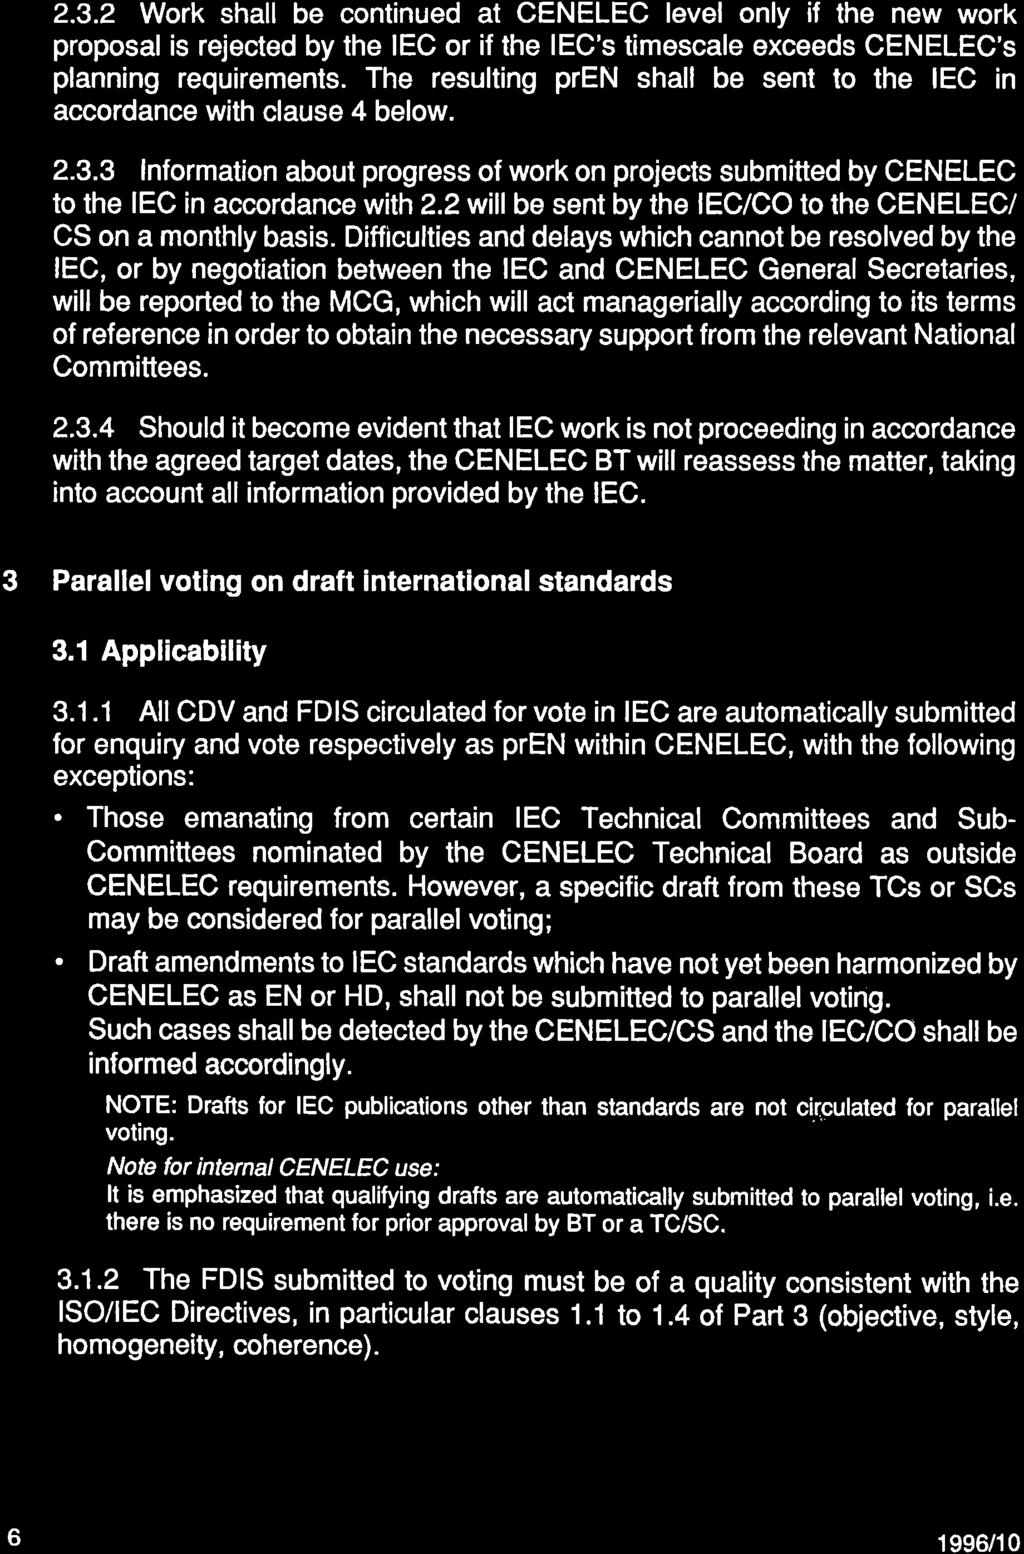 2.3.2 Work shall be continued at CENELEC level only if the new work proposal is rejected by the IEC or if the IEC's timescale exceeds CENELEC's planning requirements.